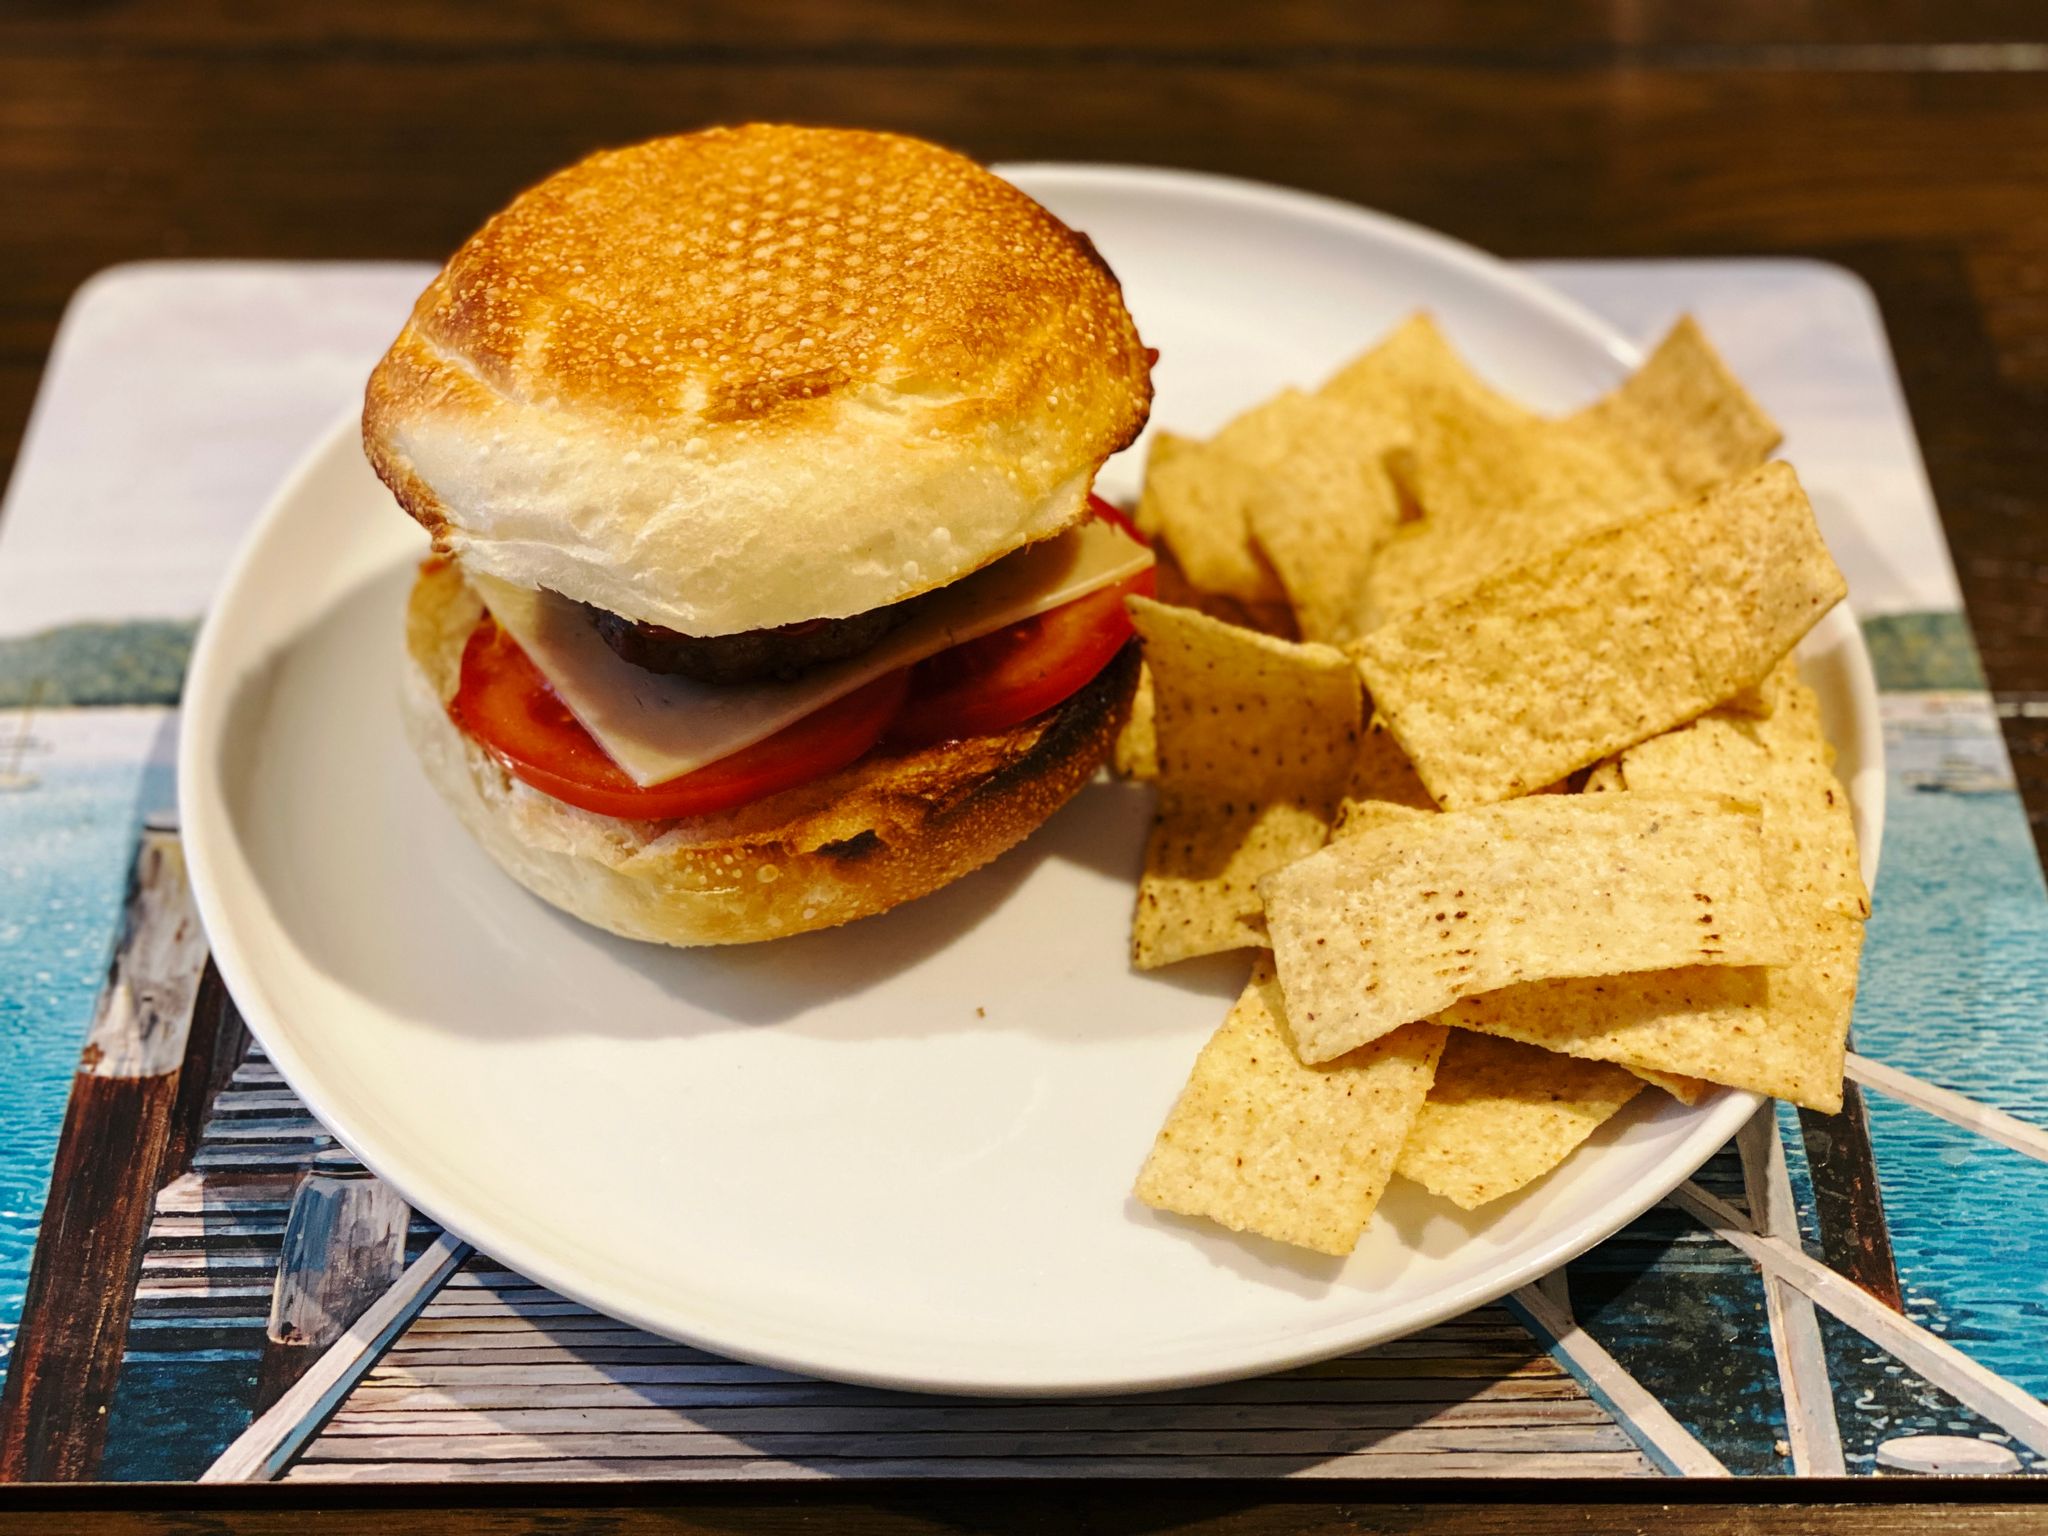 A photo of a home-made burger with tomato and cheese on it sitting next to a pile of corn chips on a plate.